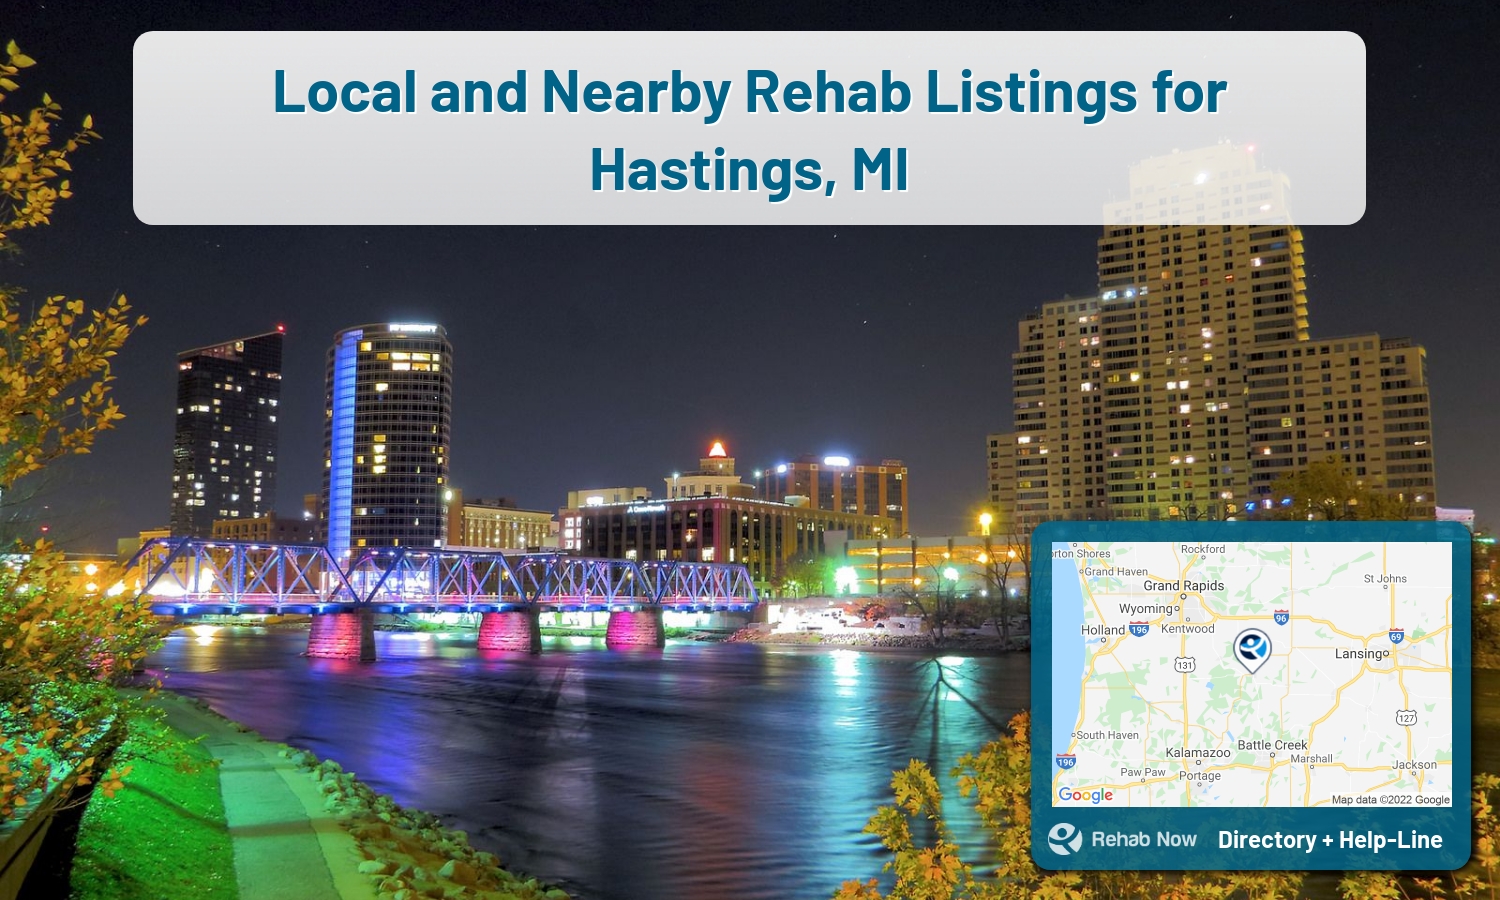 Drug rehab and alcohol treatment services nearby Hastings, MI. Need help choosing a treatment program? Call our free hotline!